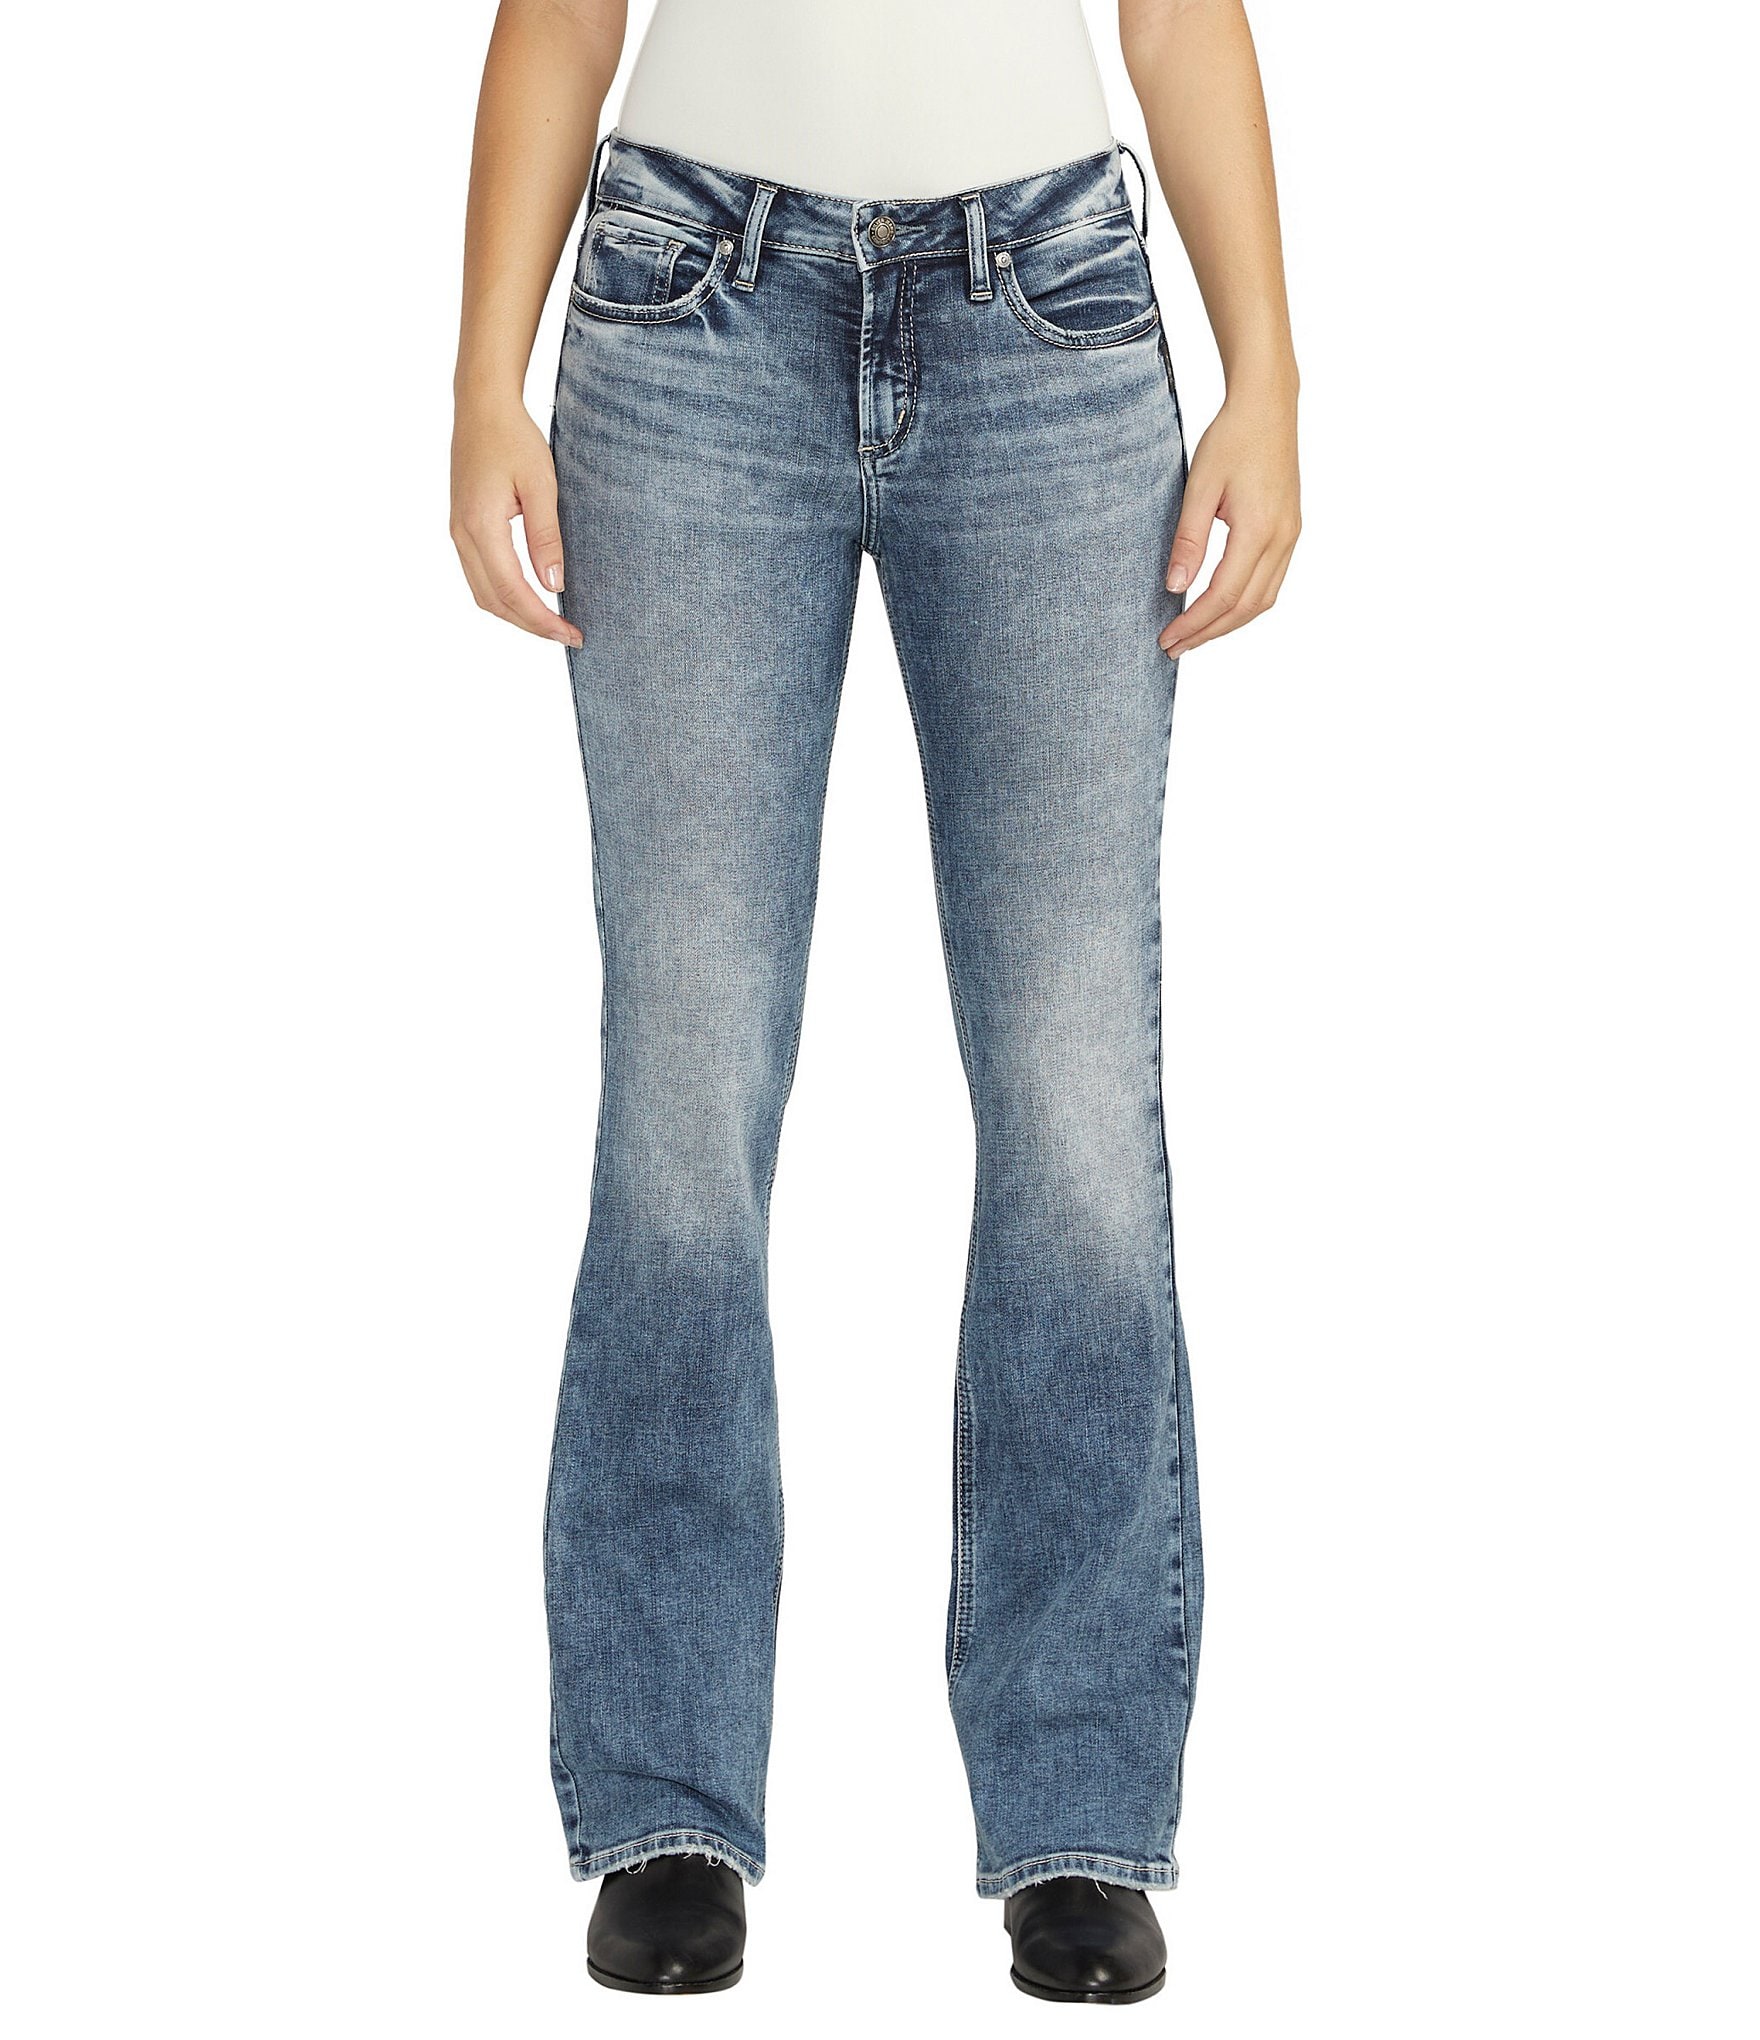 Silver Jeans Co. Mid Rise Avery Capri Jeans